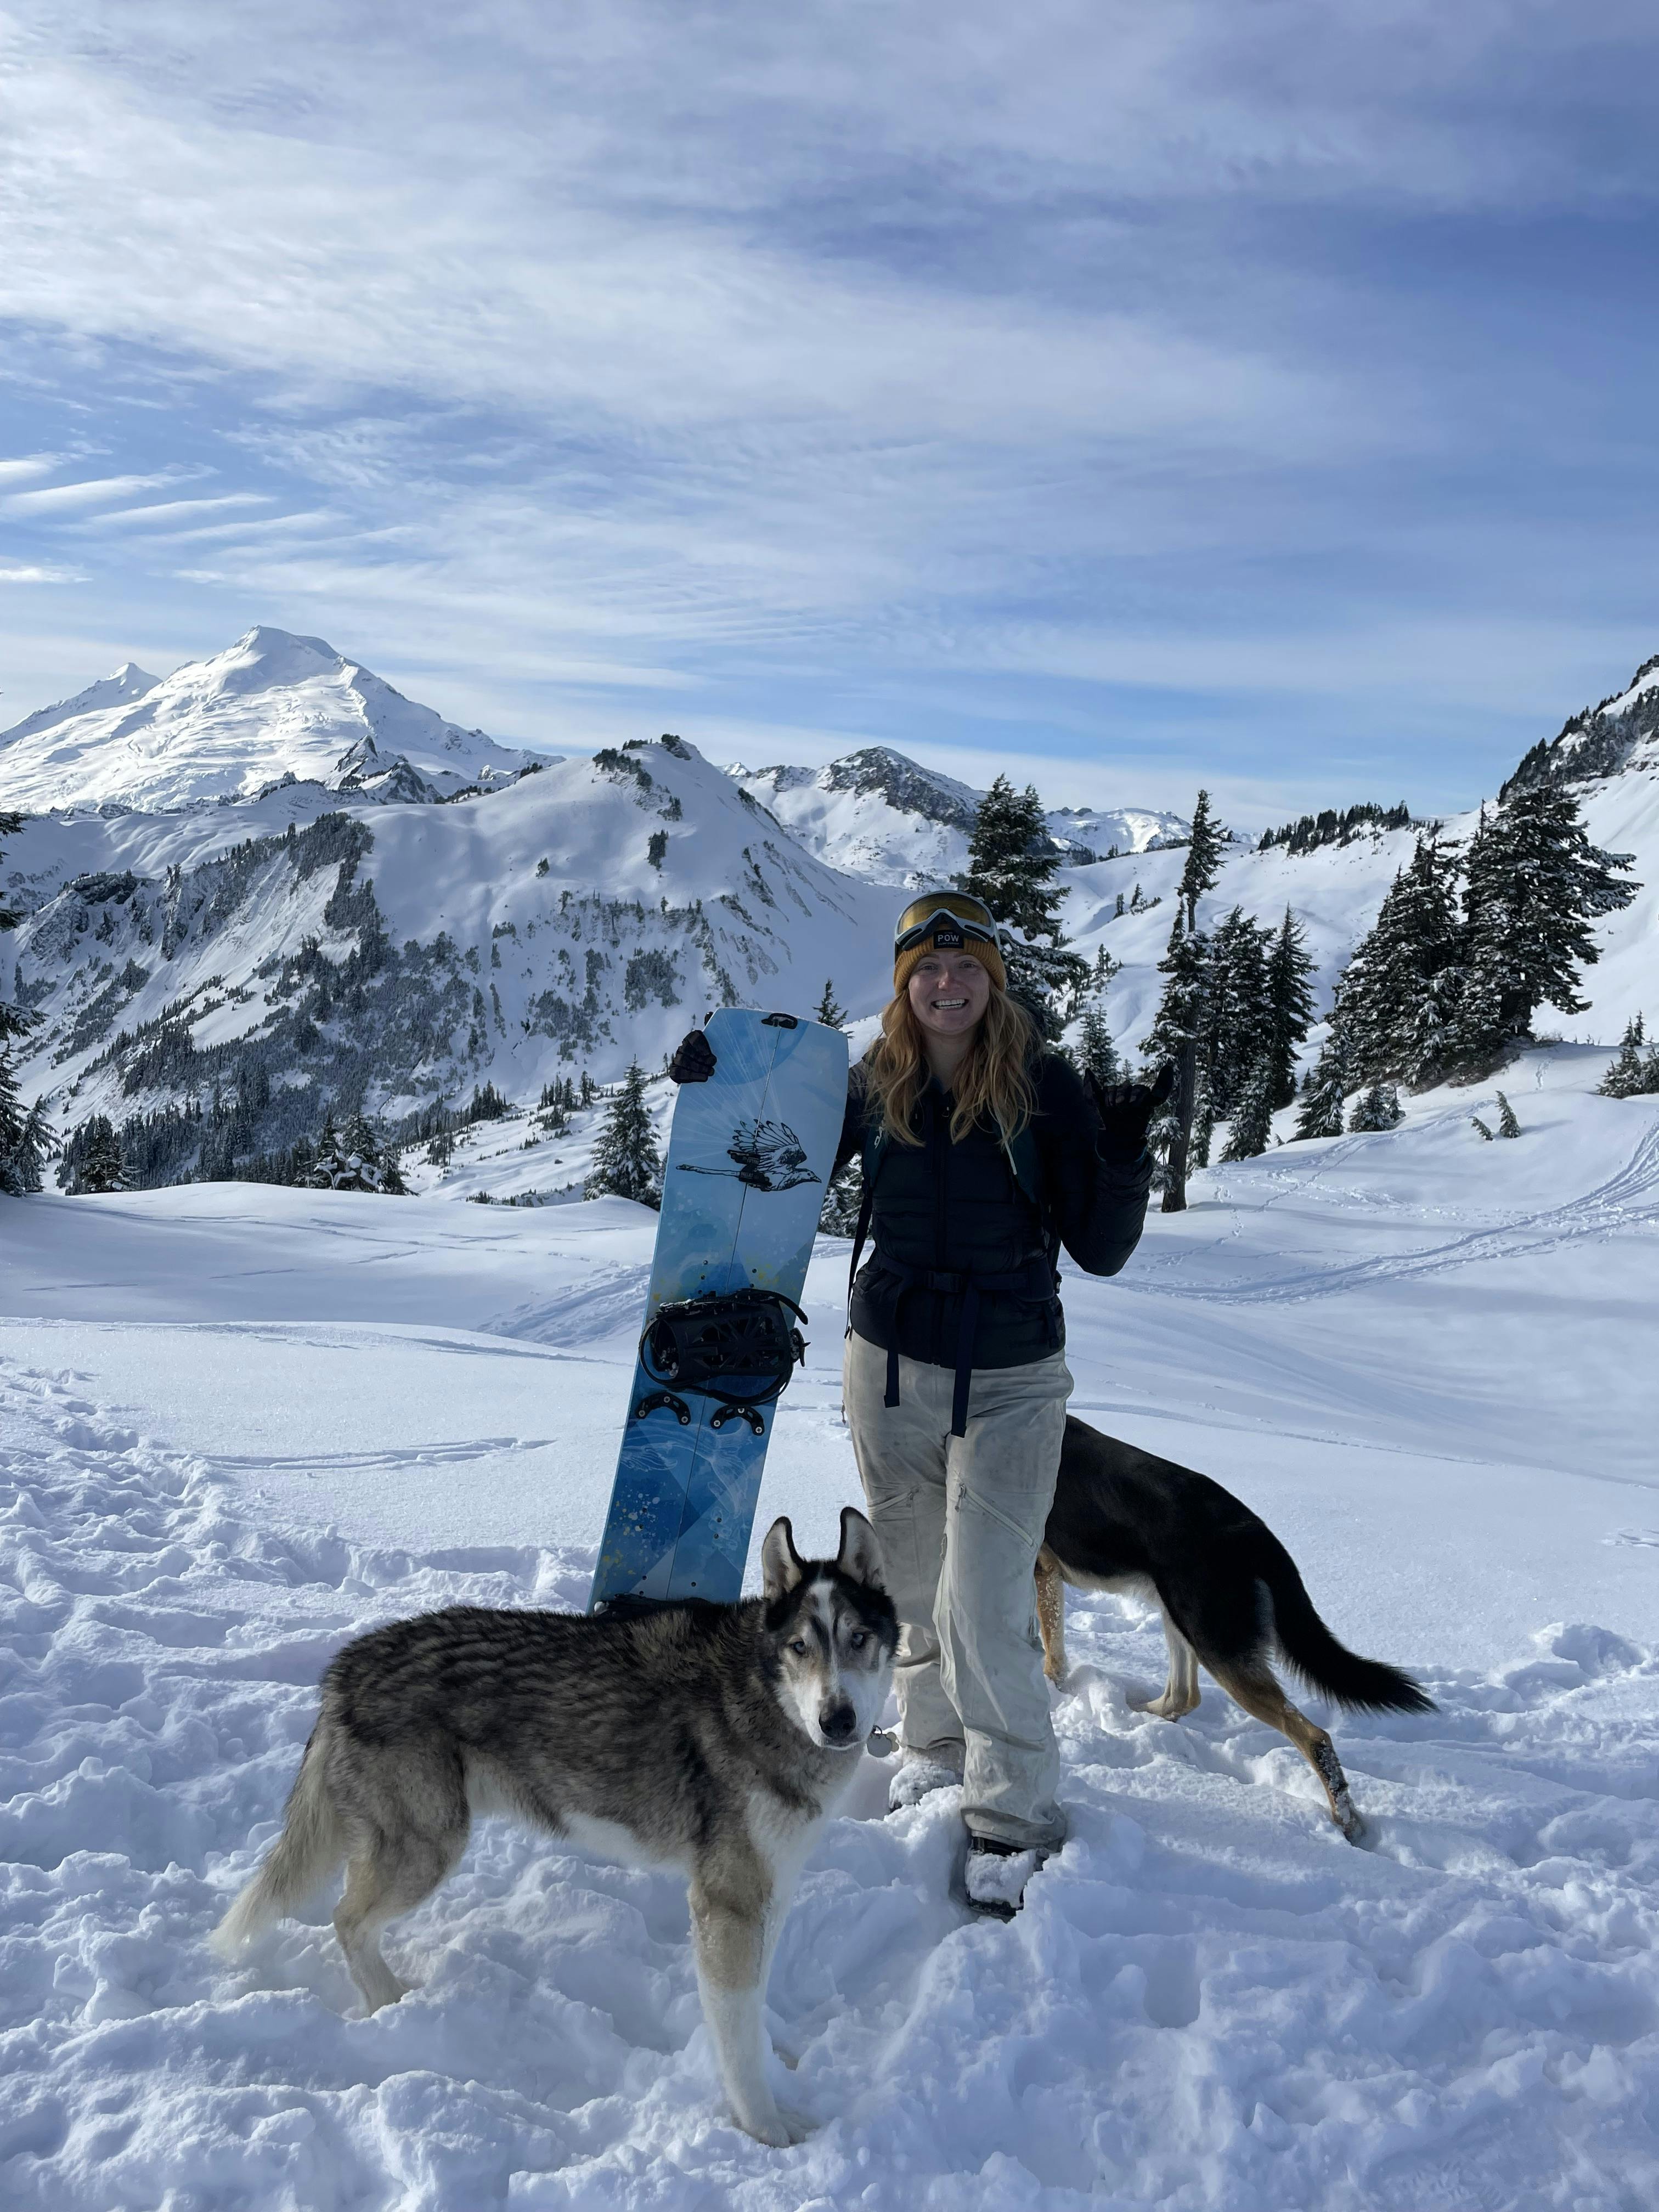 A woman poses in a snowy area with two dogs and her snowboard. There are snowy mountains in the background.